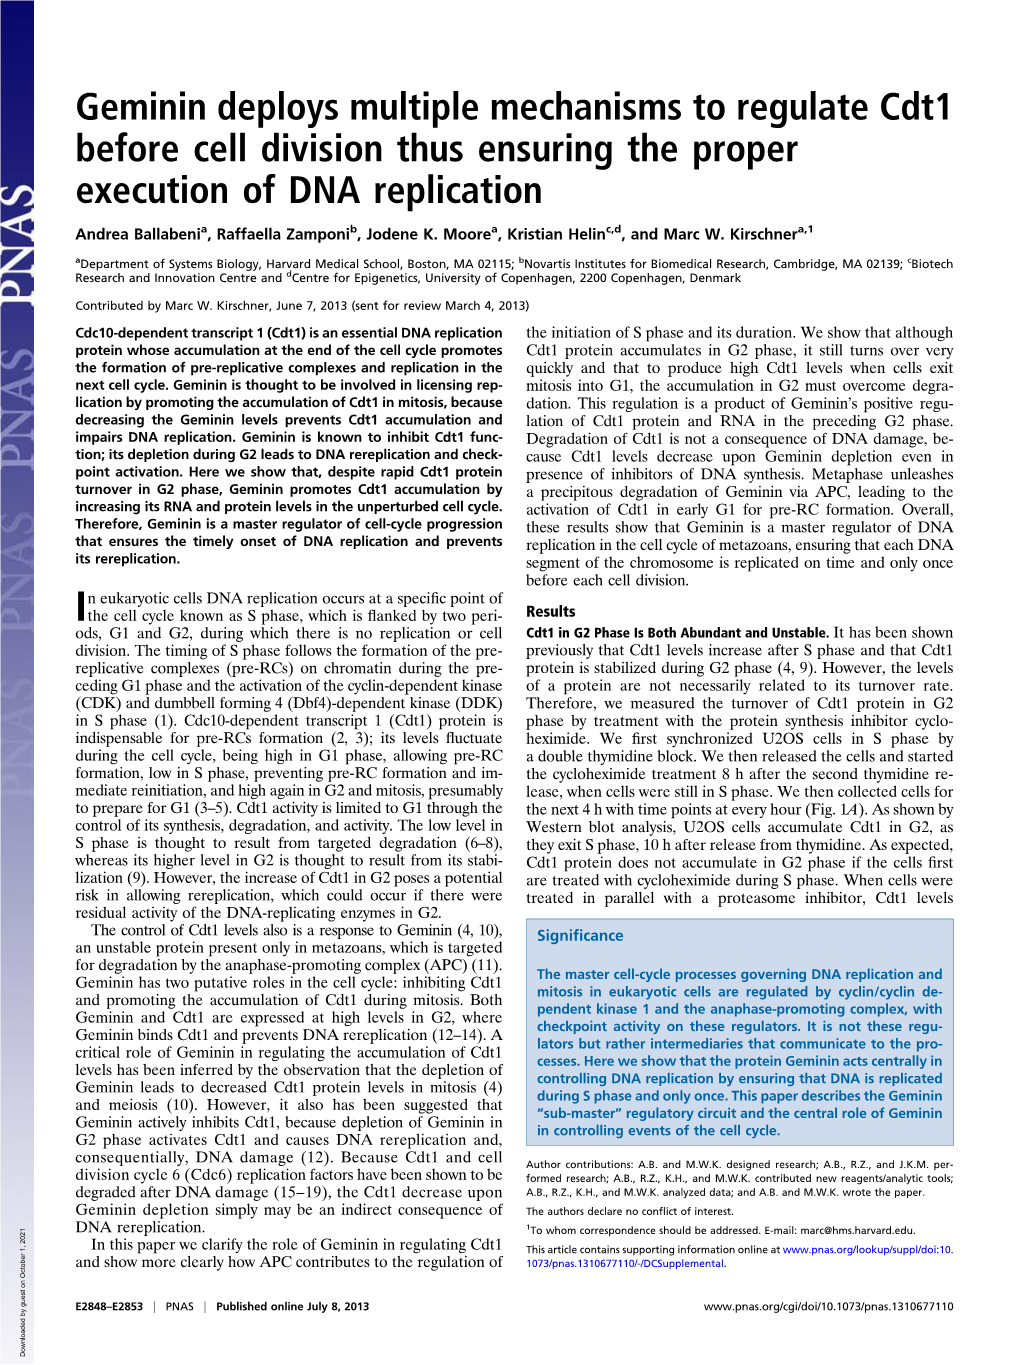 Geminin Deploys Multiple Mechanisms to Regulate Cdt1 Before Cell Division Thus Ensuring the Proper Execution of DNA Replication